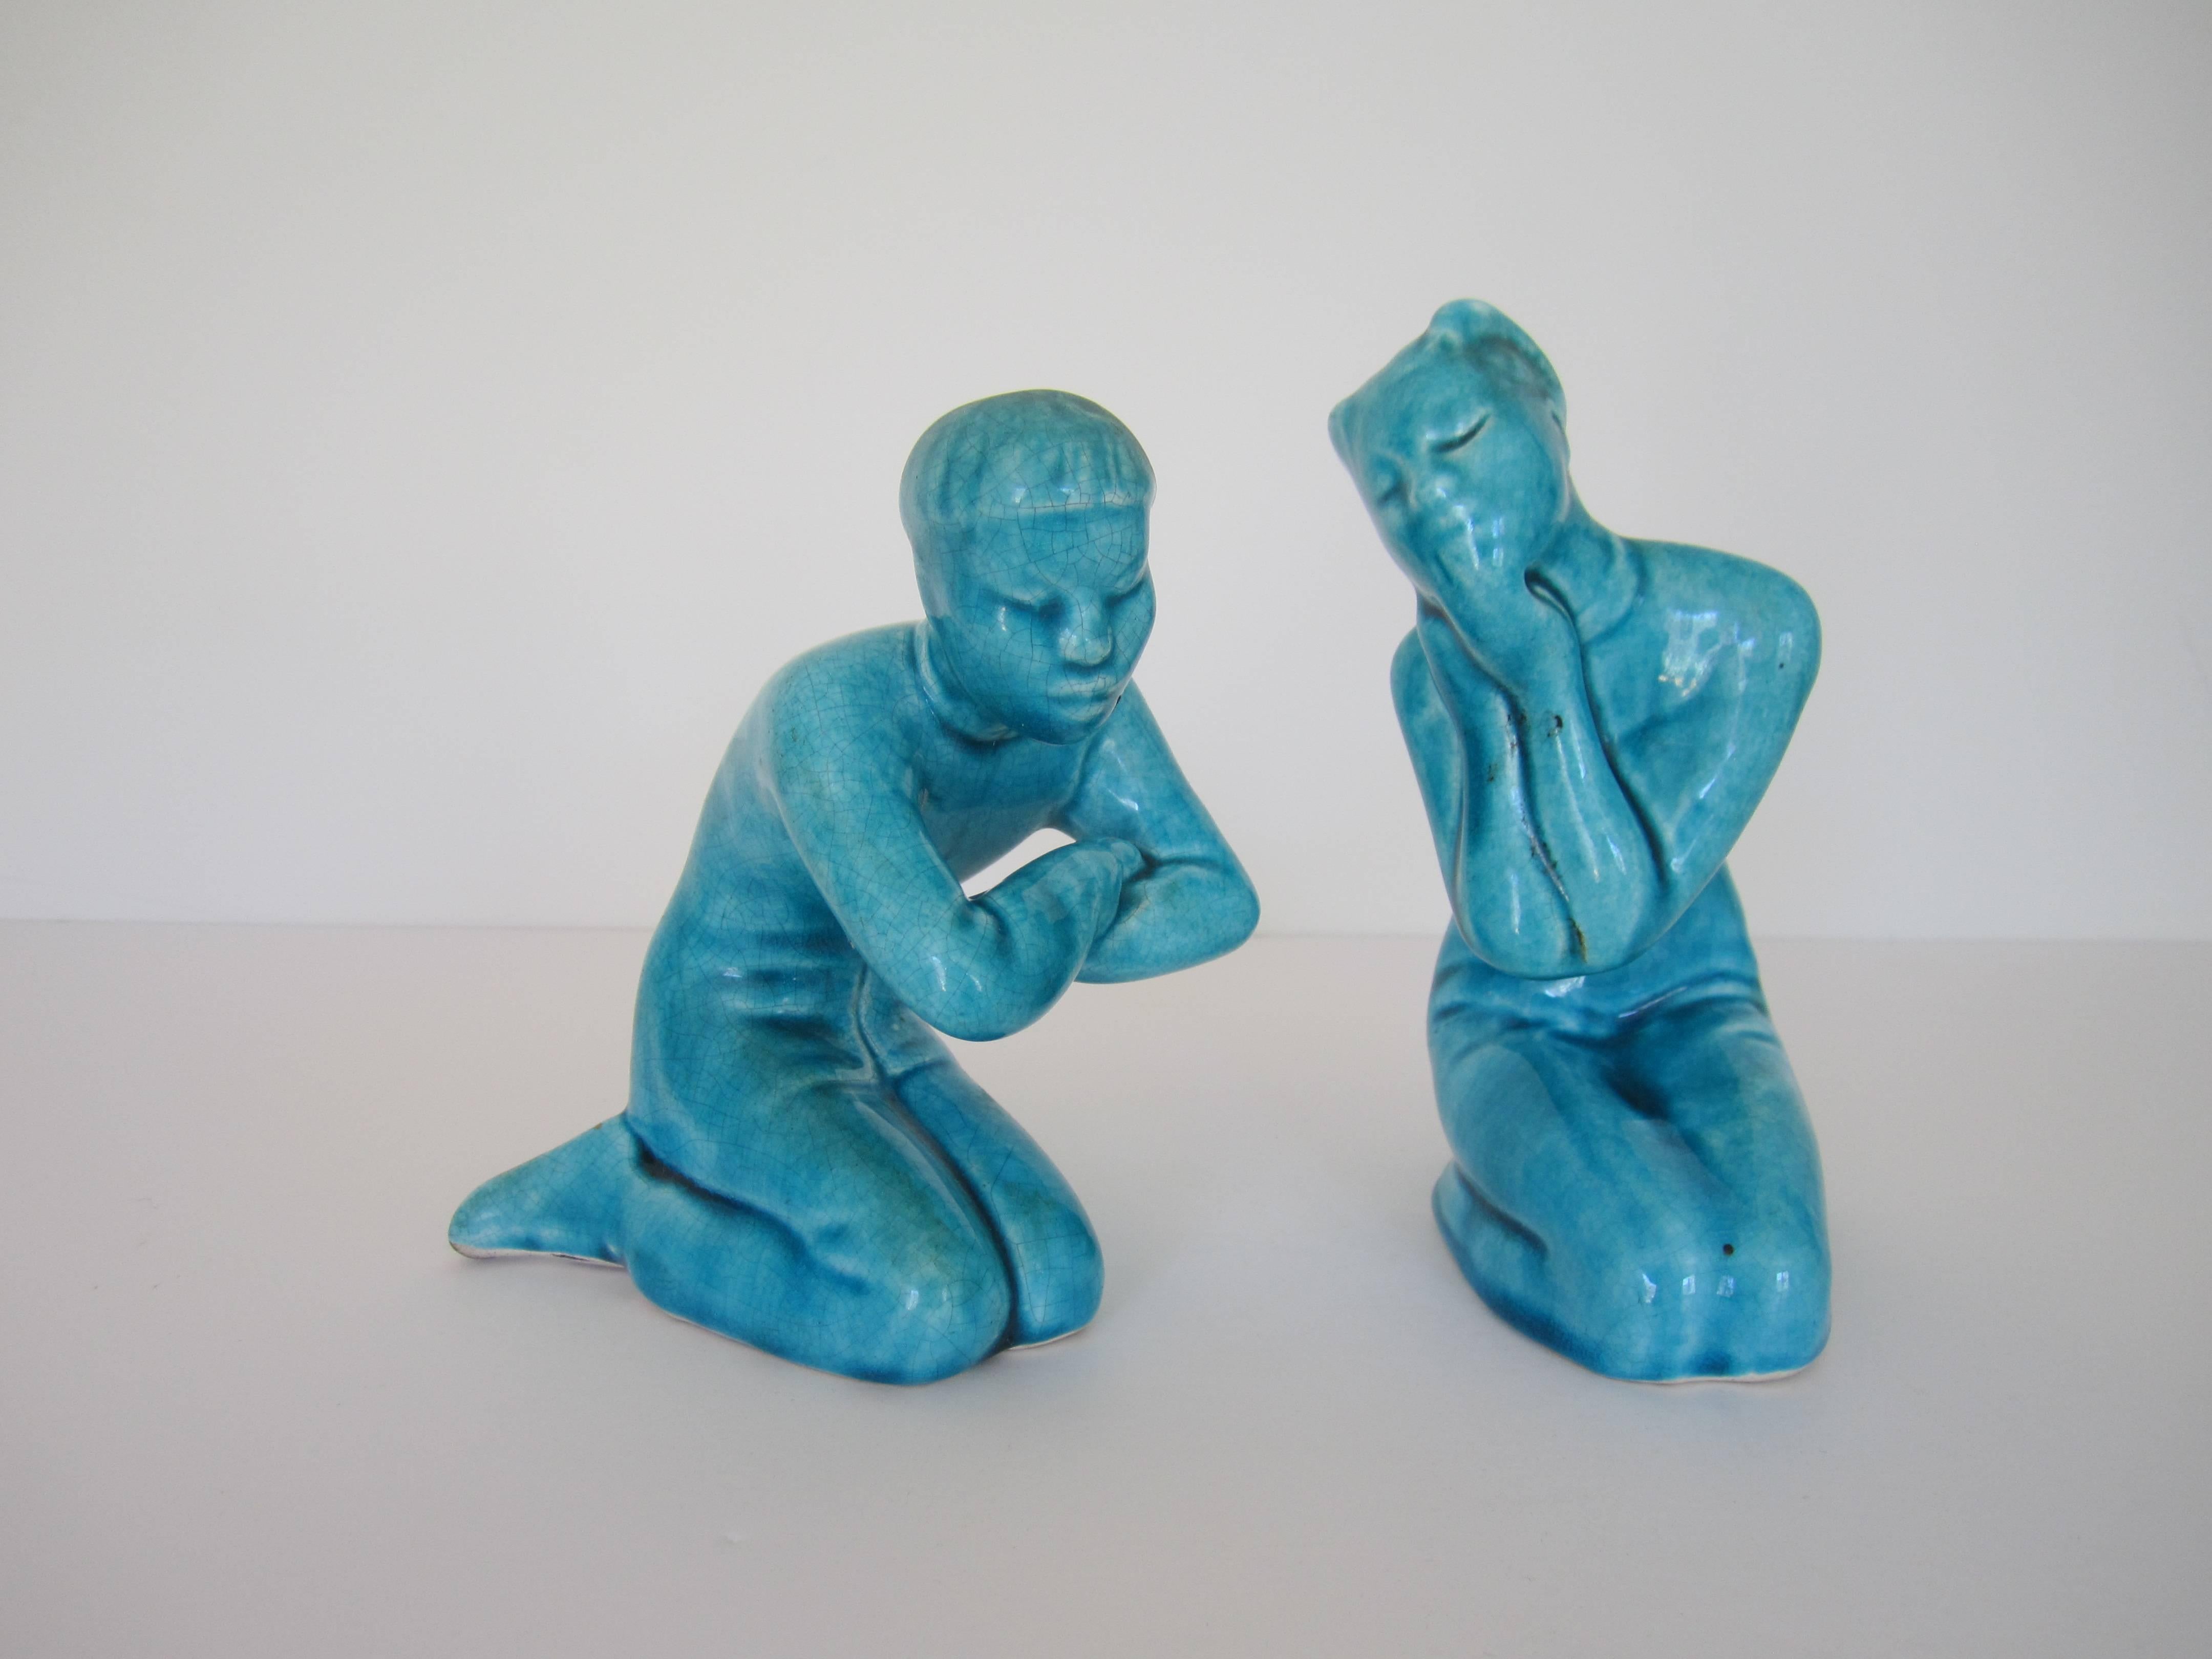 A pair of mid-20th century turquoise blue Asian male and female figural porcelain ceramic sculptures with 'crackle' design and glazed finish. Height is approximately 6.25